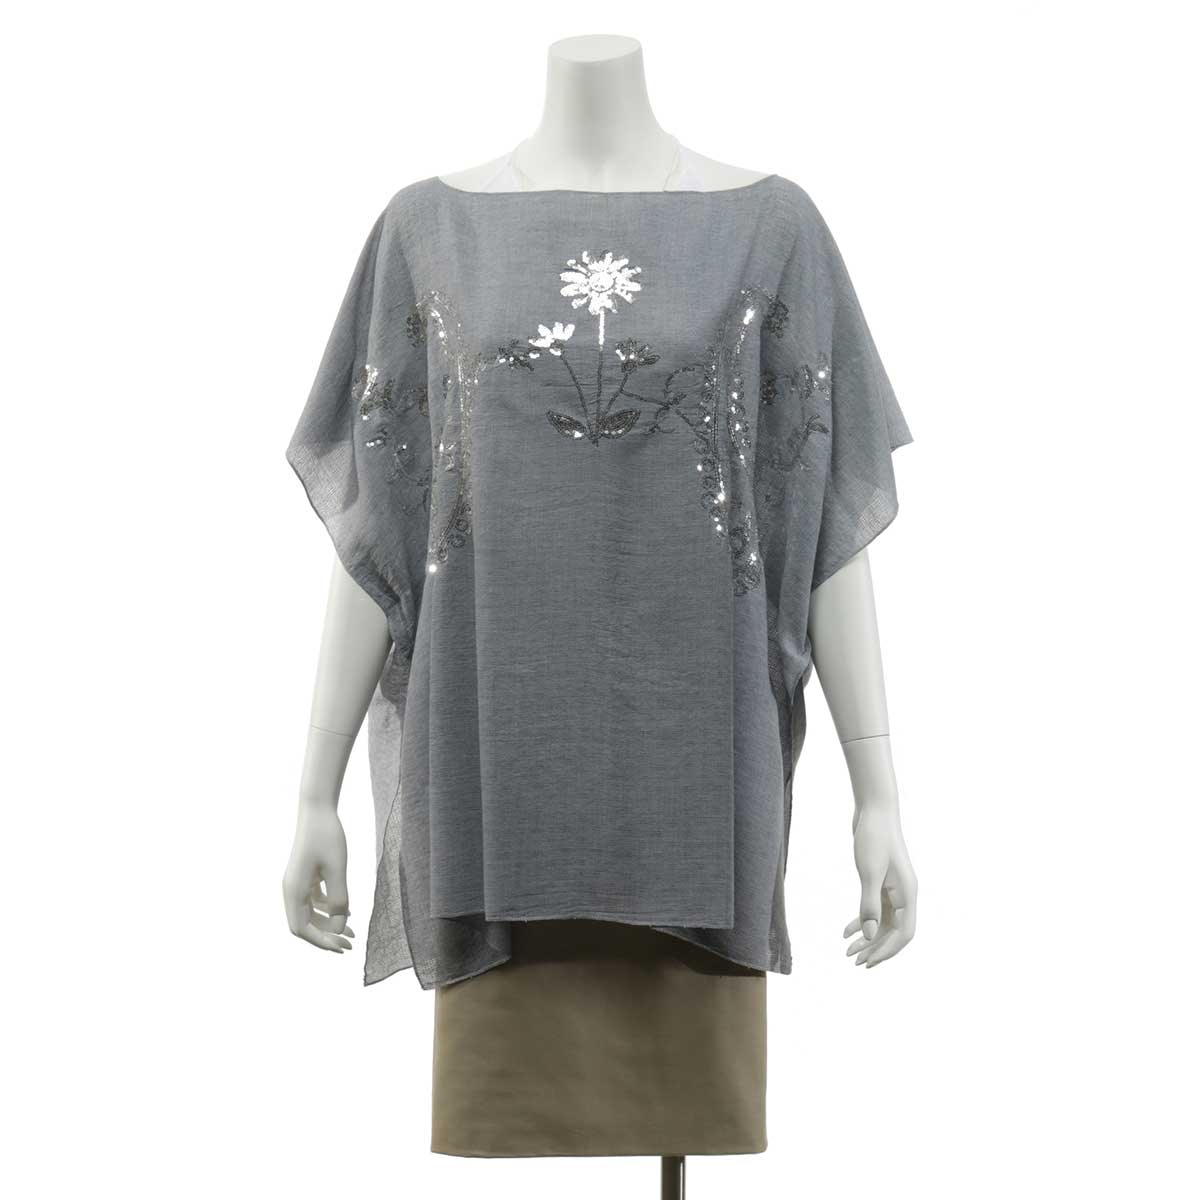 Grey Tunic with Silver Sequins 34"x28" 50sp